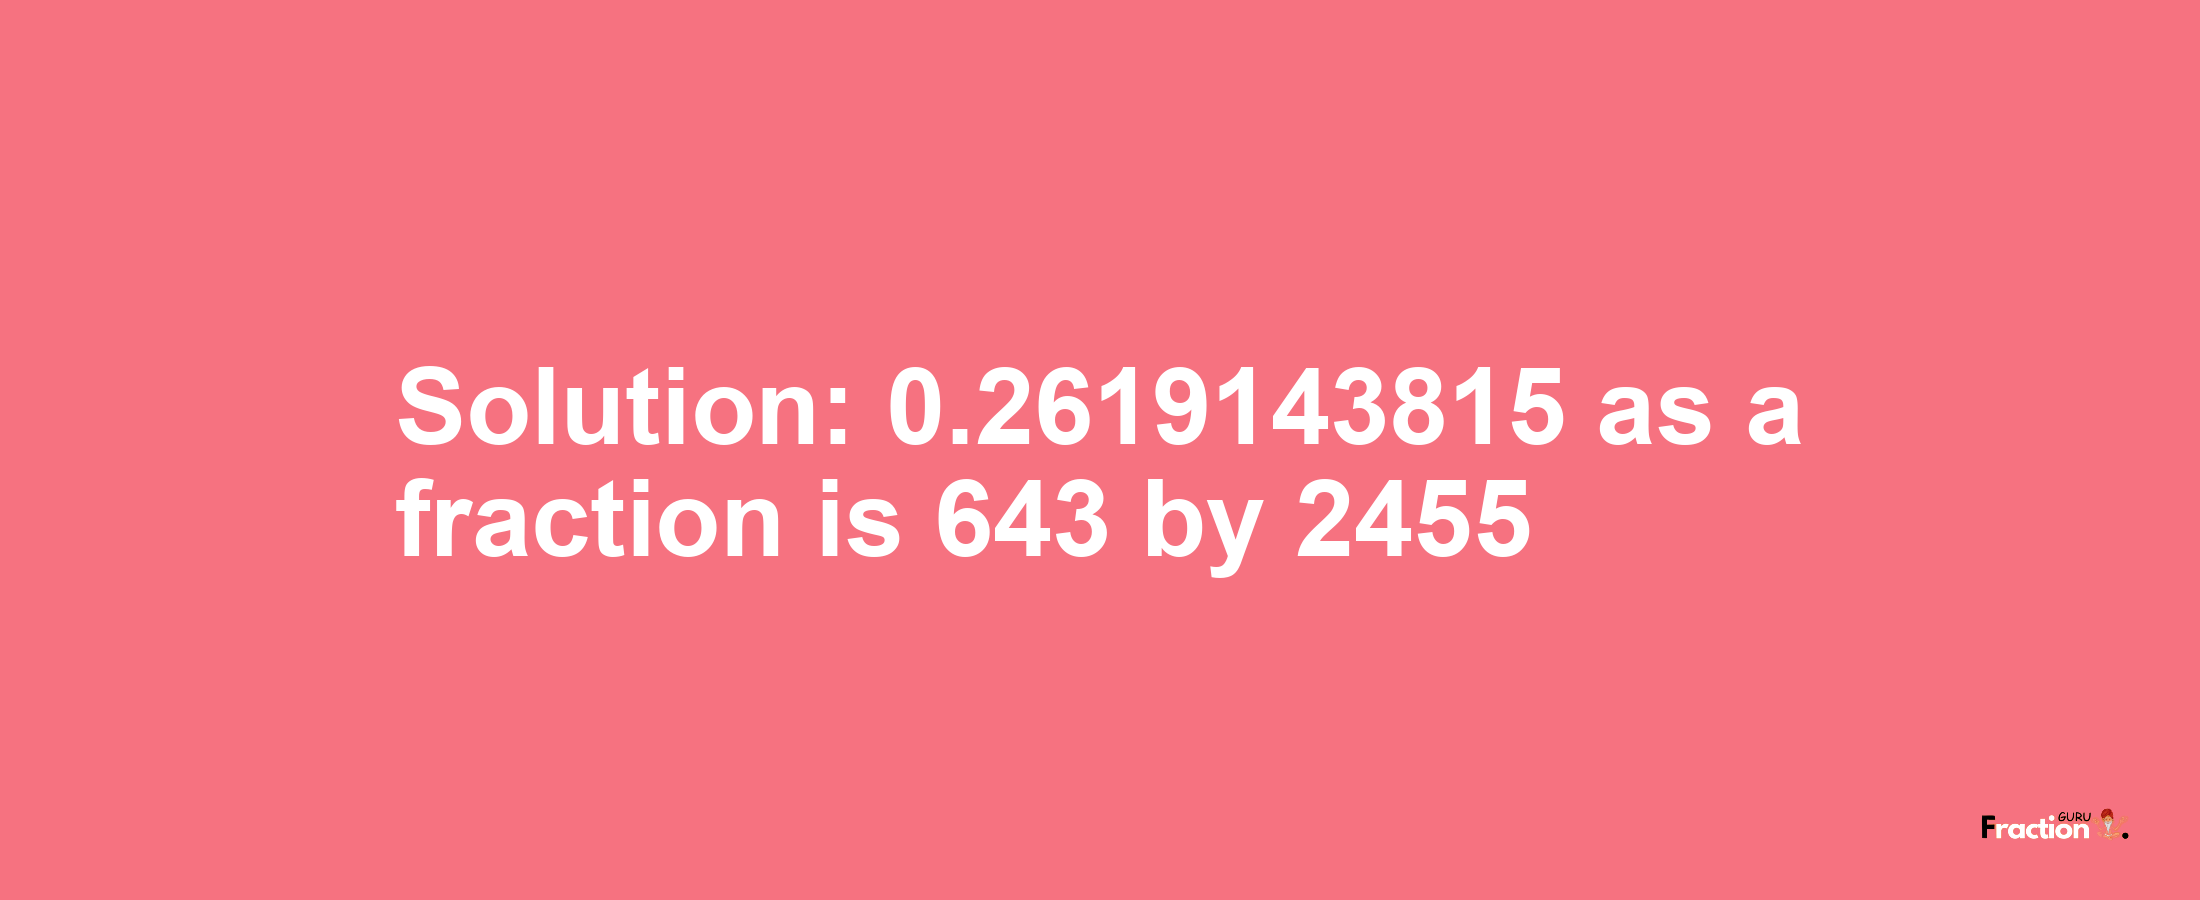 Solution:0.2619143815 as a fraction is 643/2455